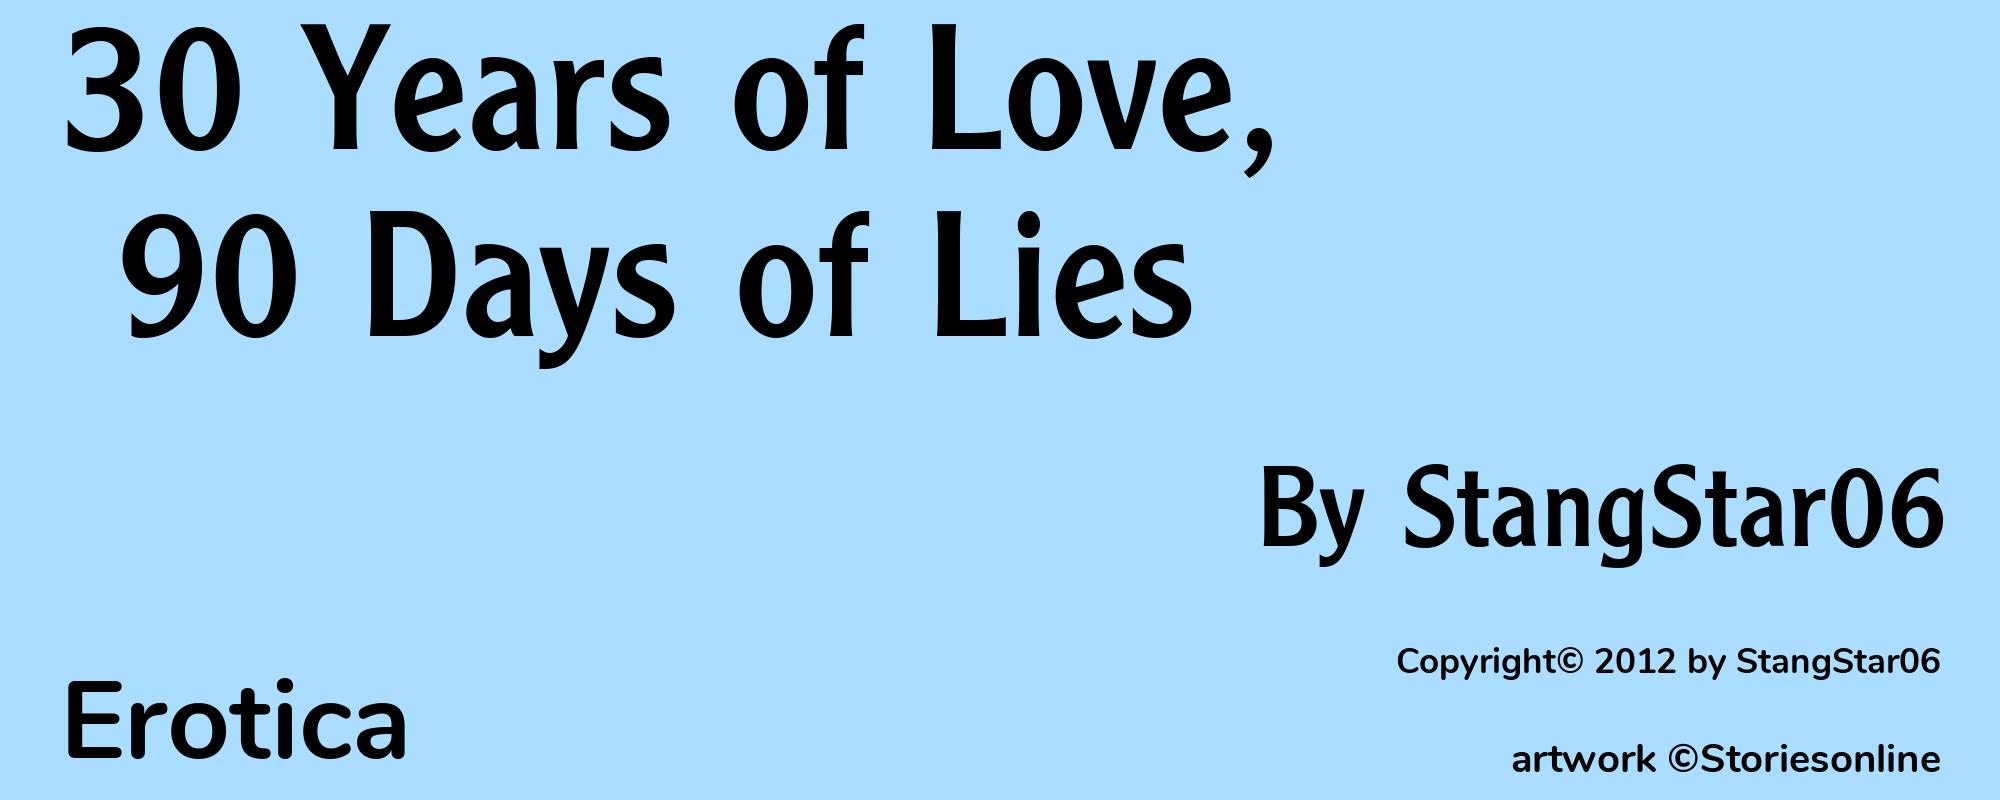 30 Years of Love, 90 Days of Lies - Cover